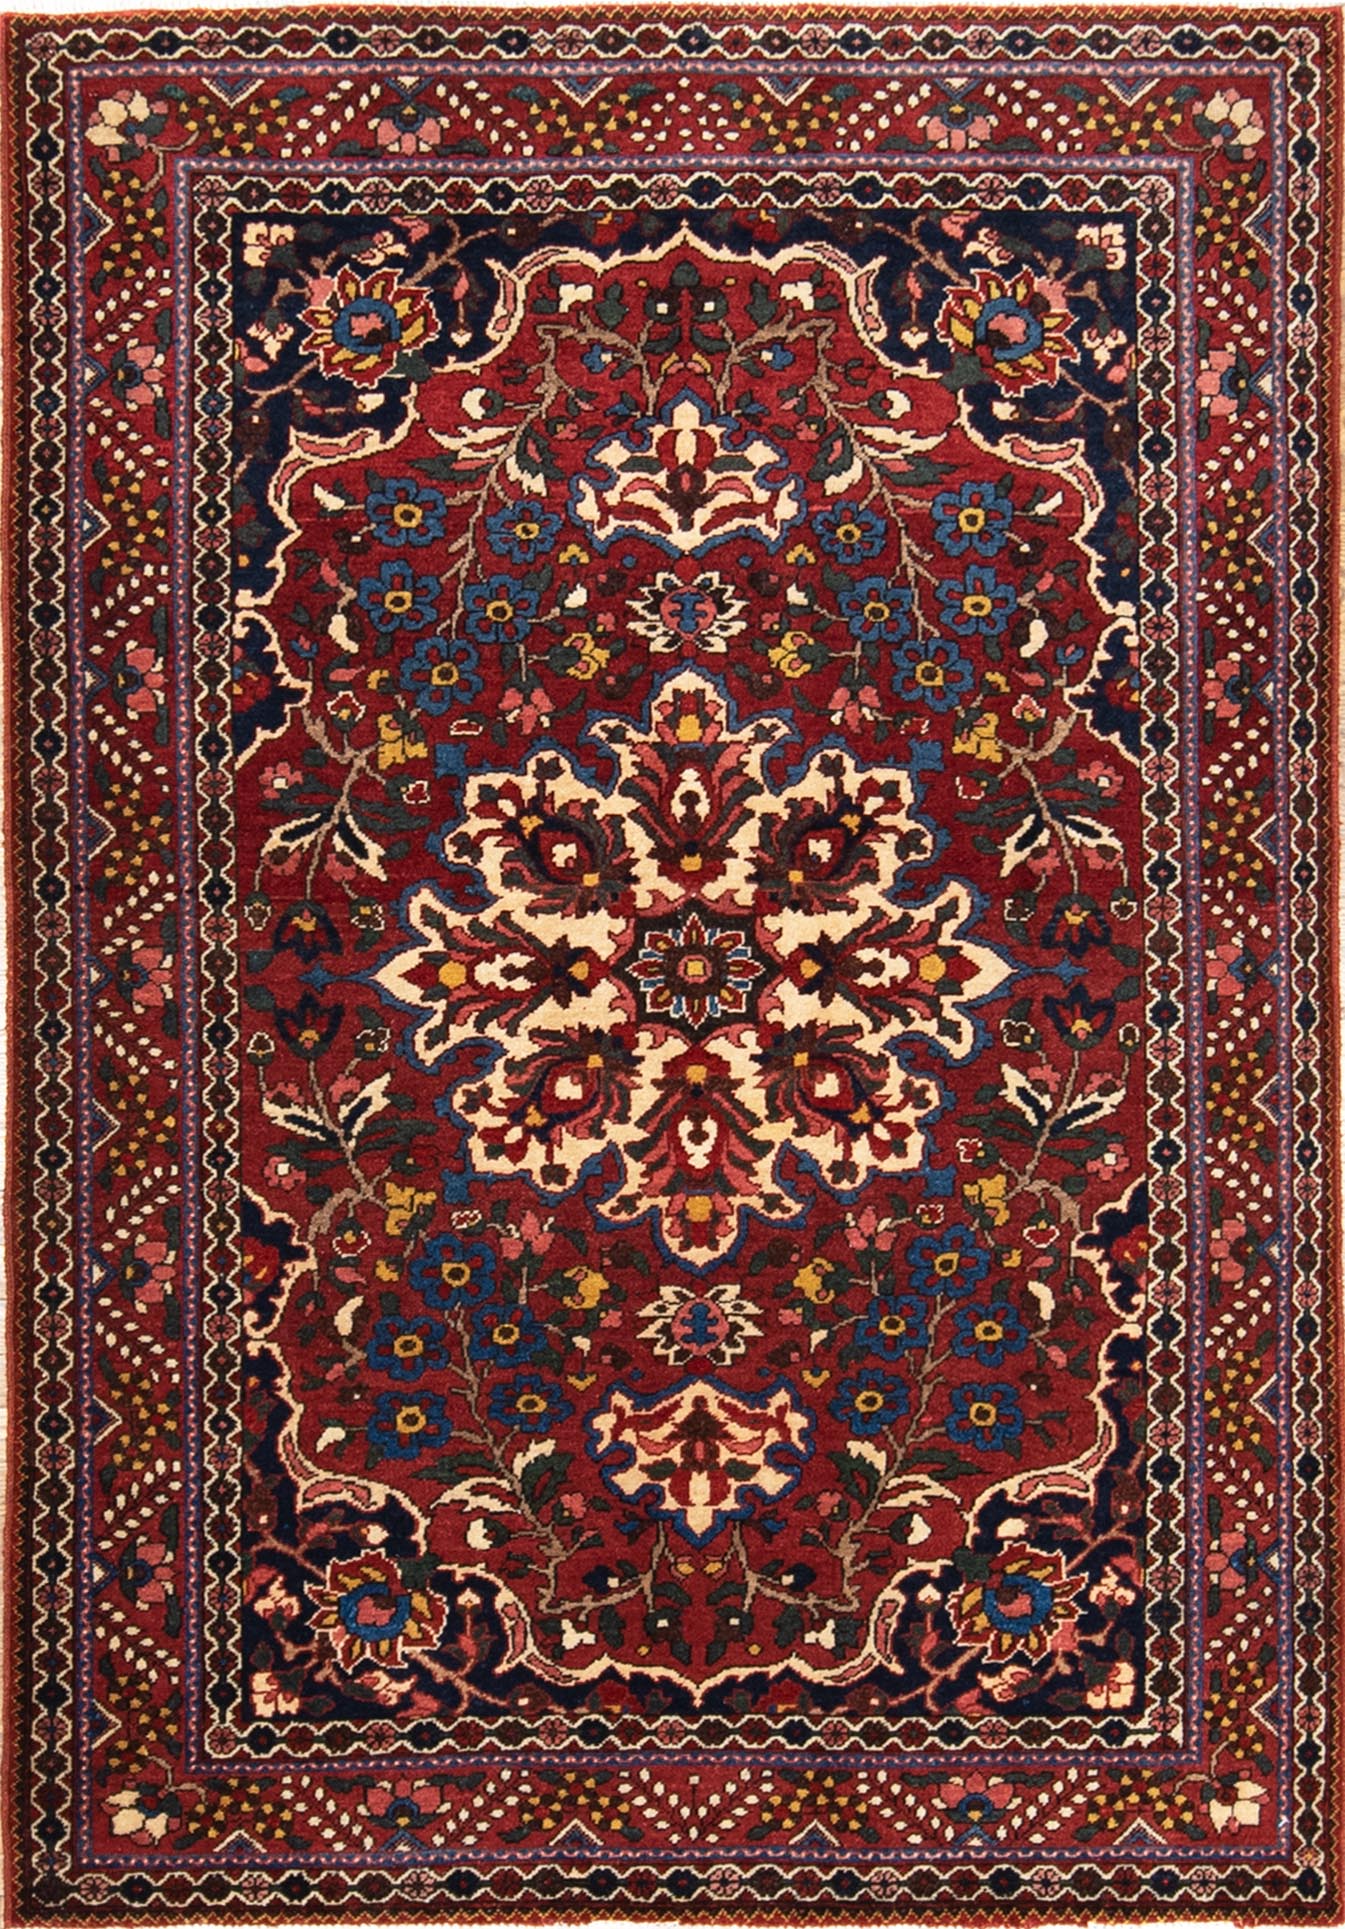 Vintage Persian Bakhtiari wool rug with terracotta and blue colors. Rug size 4.8x6.8.